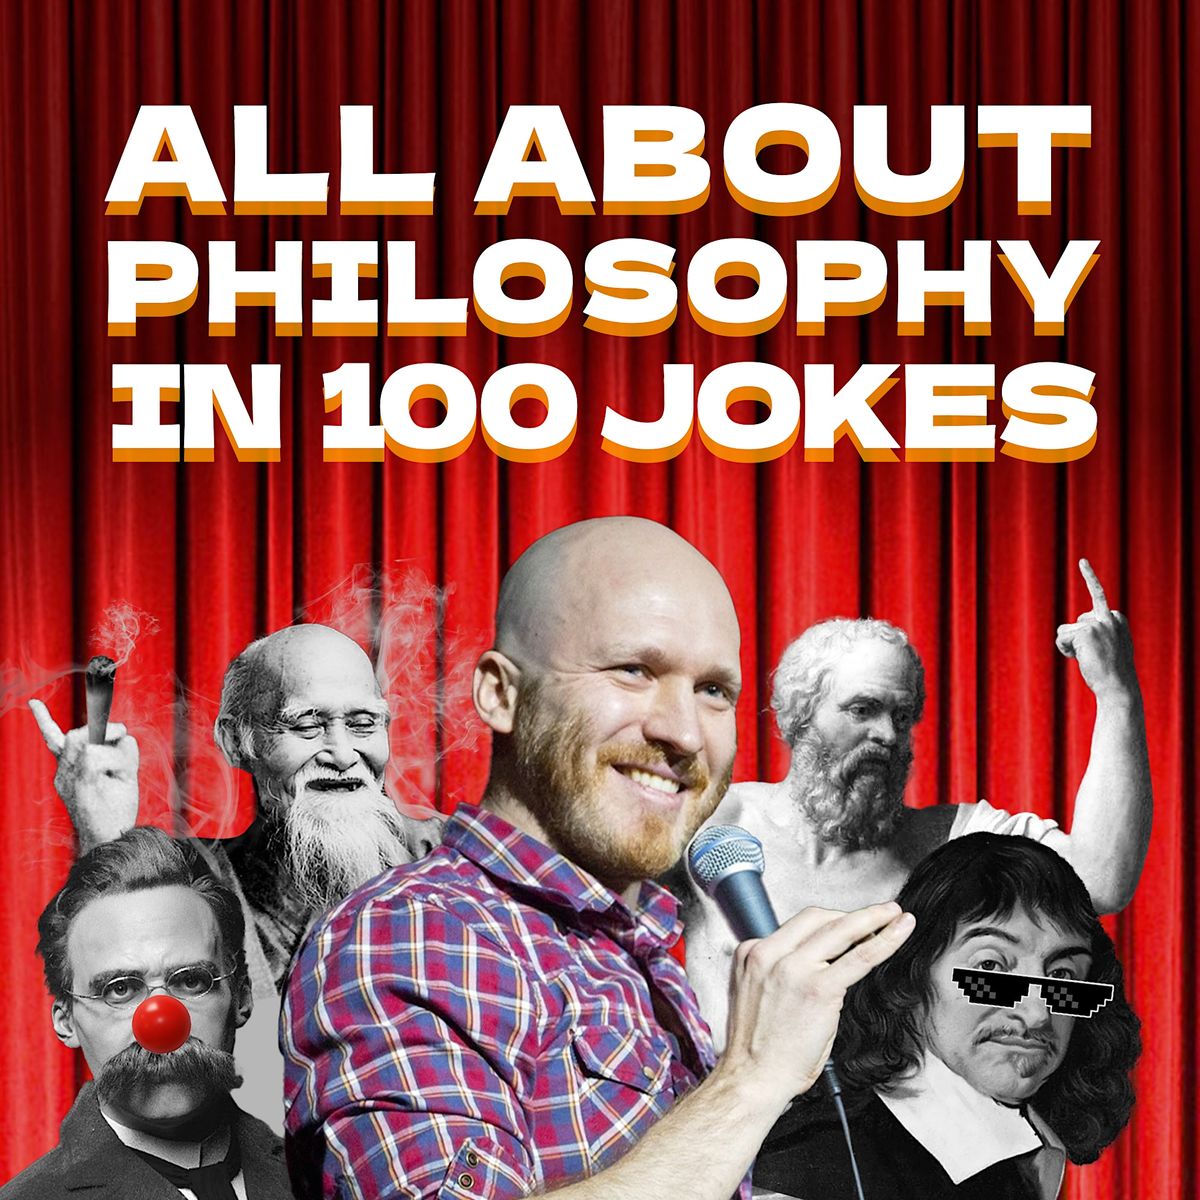 English stand-up special: All About Philosophy in 100 Jokes (WIP)